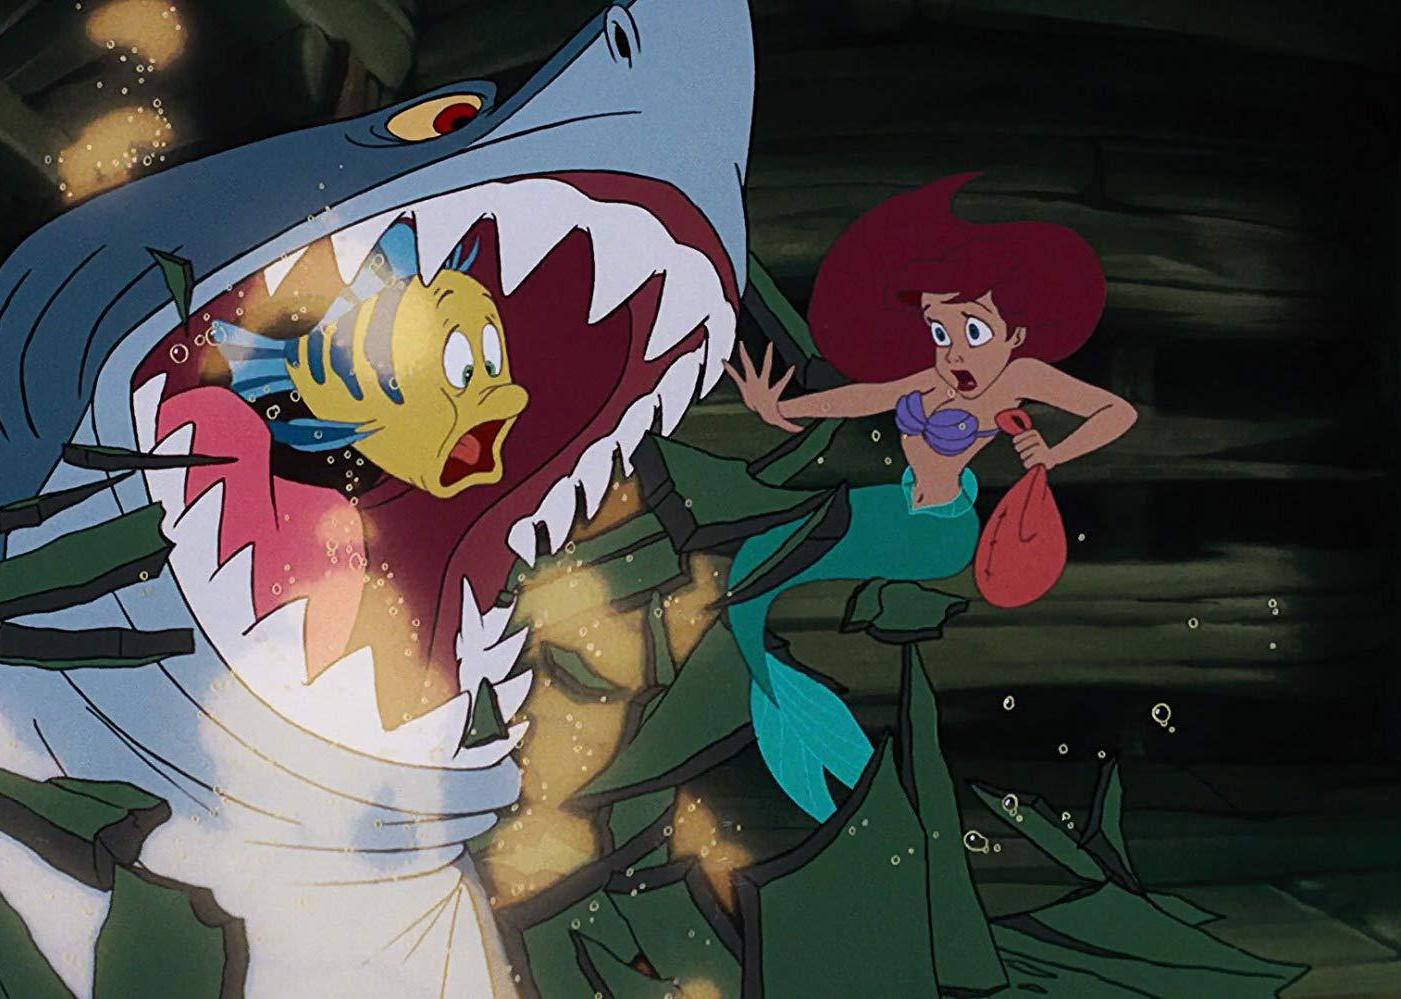 The Little Mermaid in shock looking at an open shark's mouth with a small fish inside.